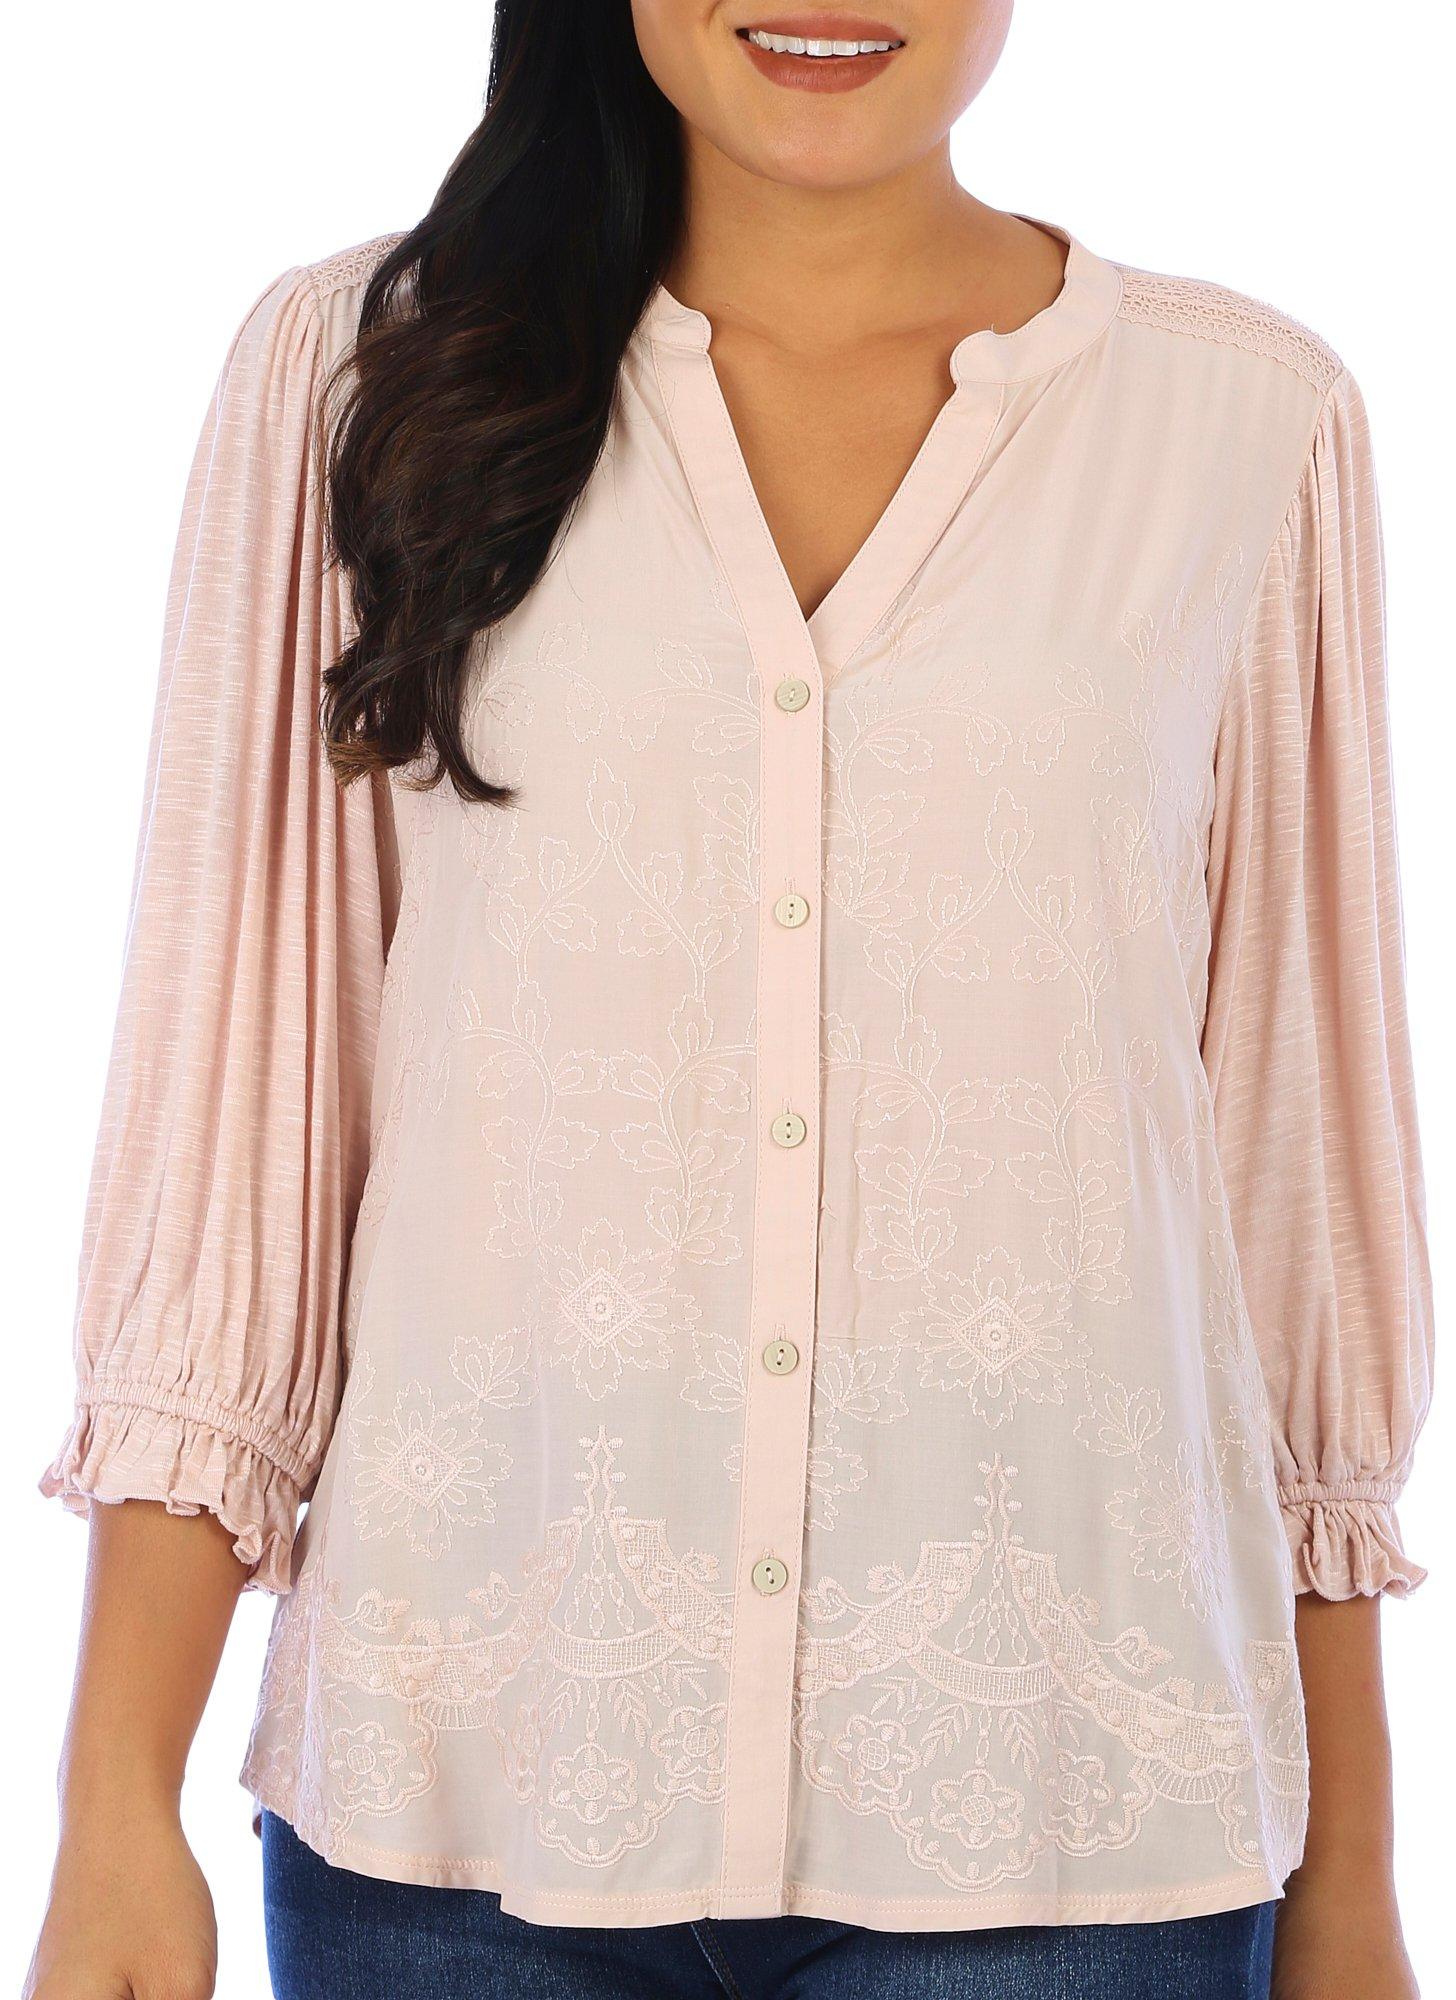 Womens Embroidered Lantern Sleeve Top